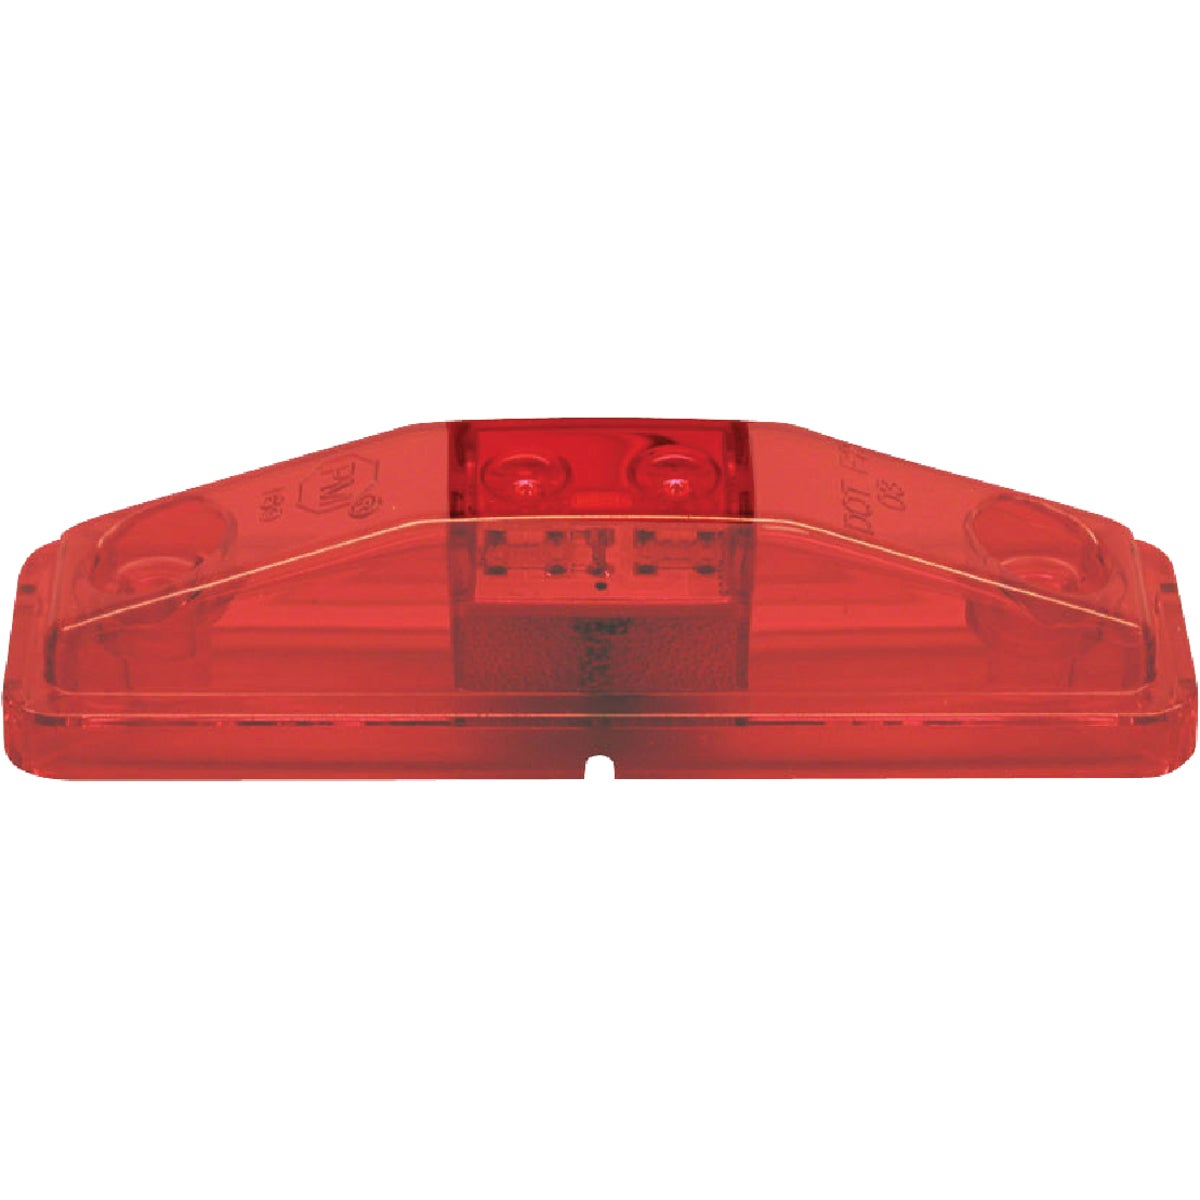 Item 575103, The ProClass LED Red Clearance/Sidemarker Light can be used as a clearance 